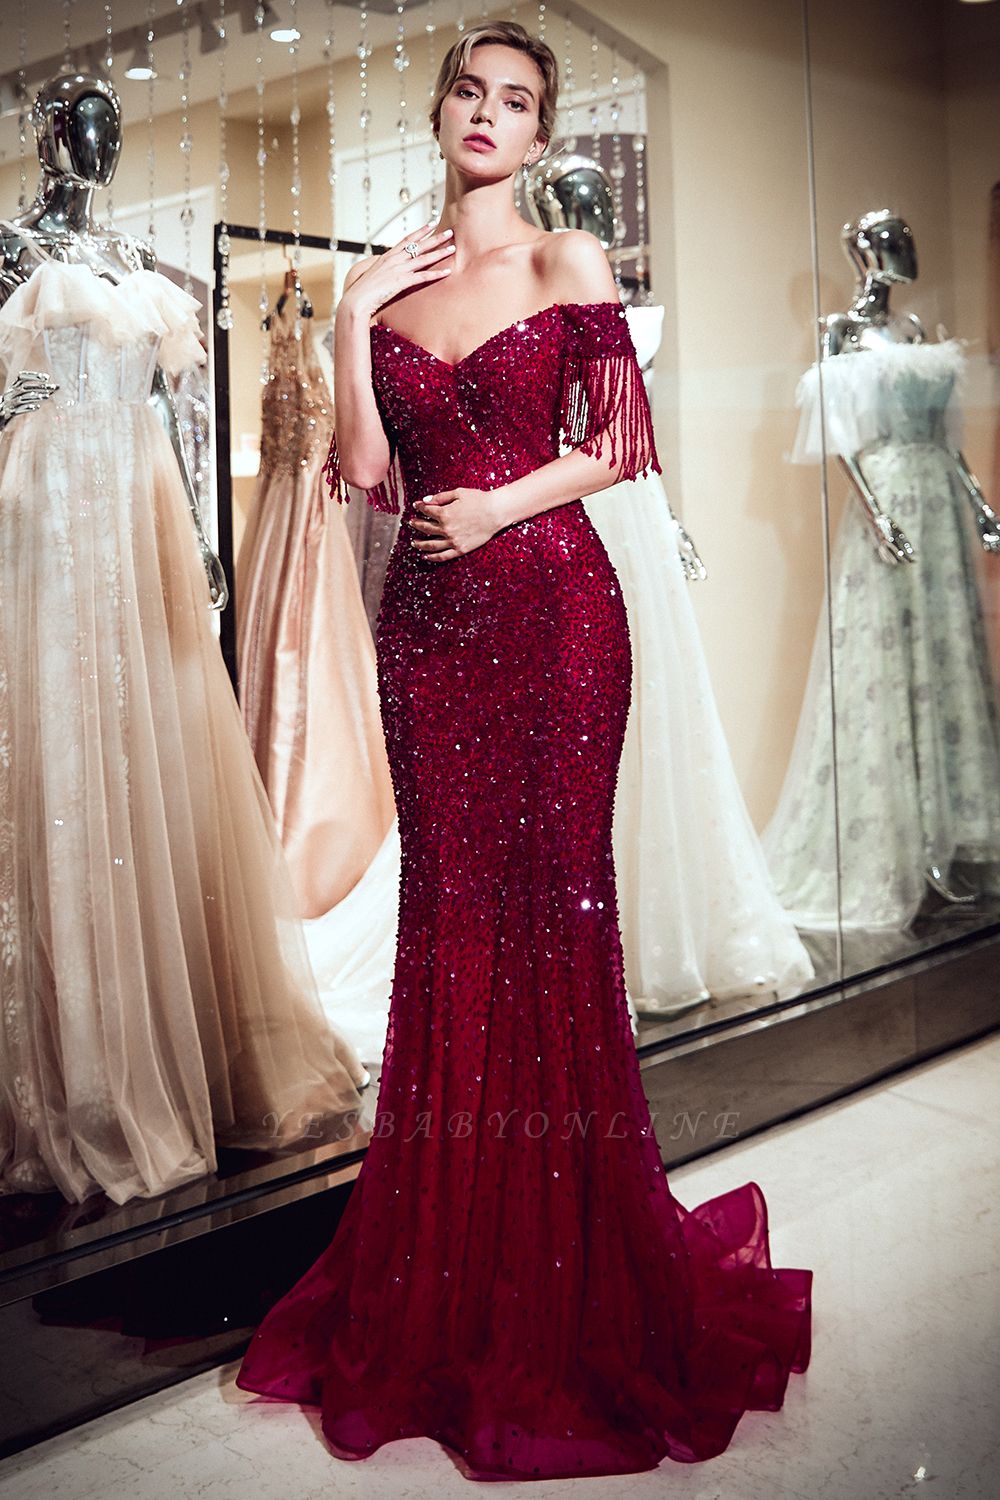 Sparkly Burgundy Crystal Off-the-Shoulder Prom Dress | Mermaid Evening Dress with Tassels